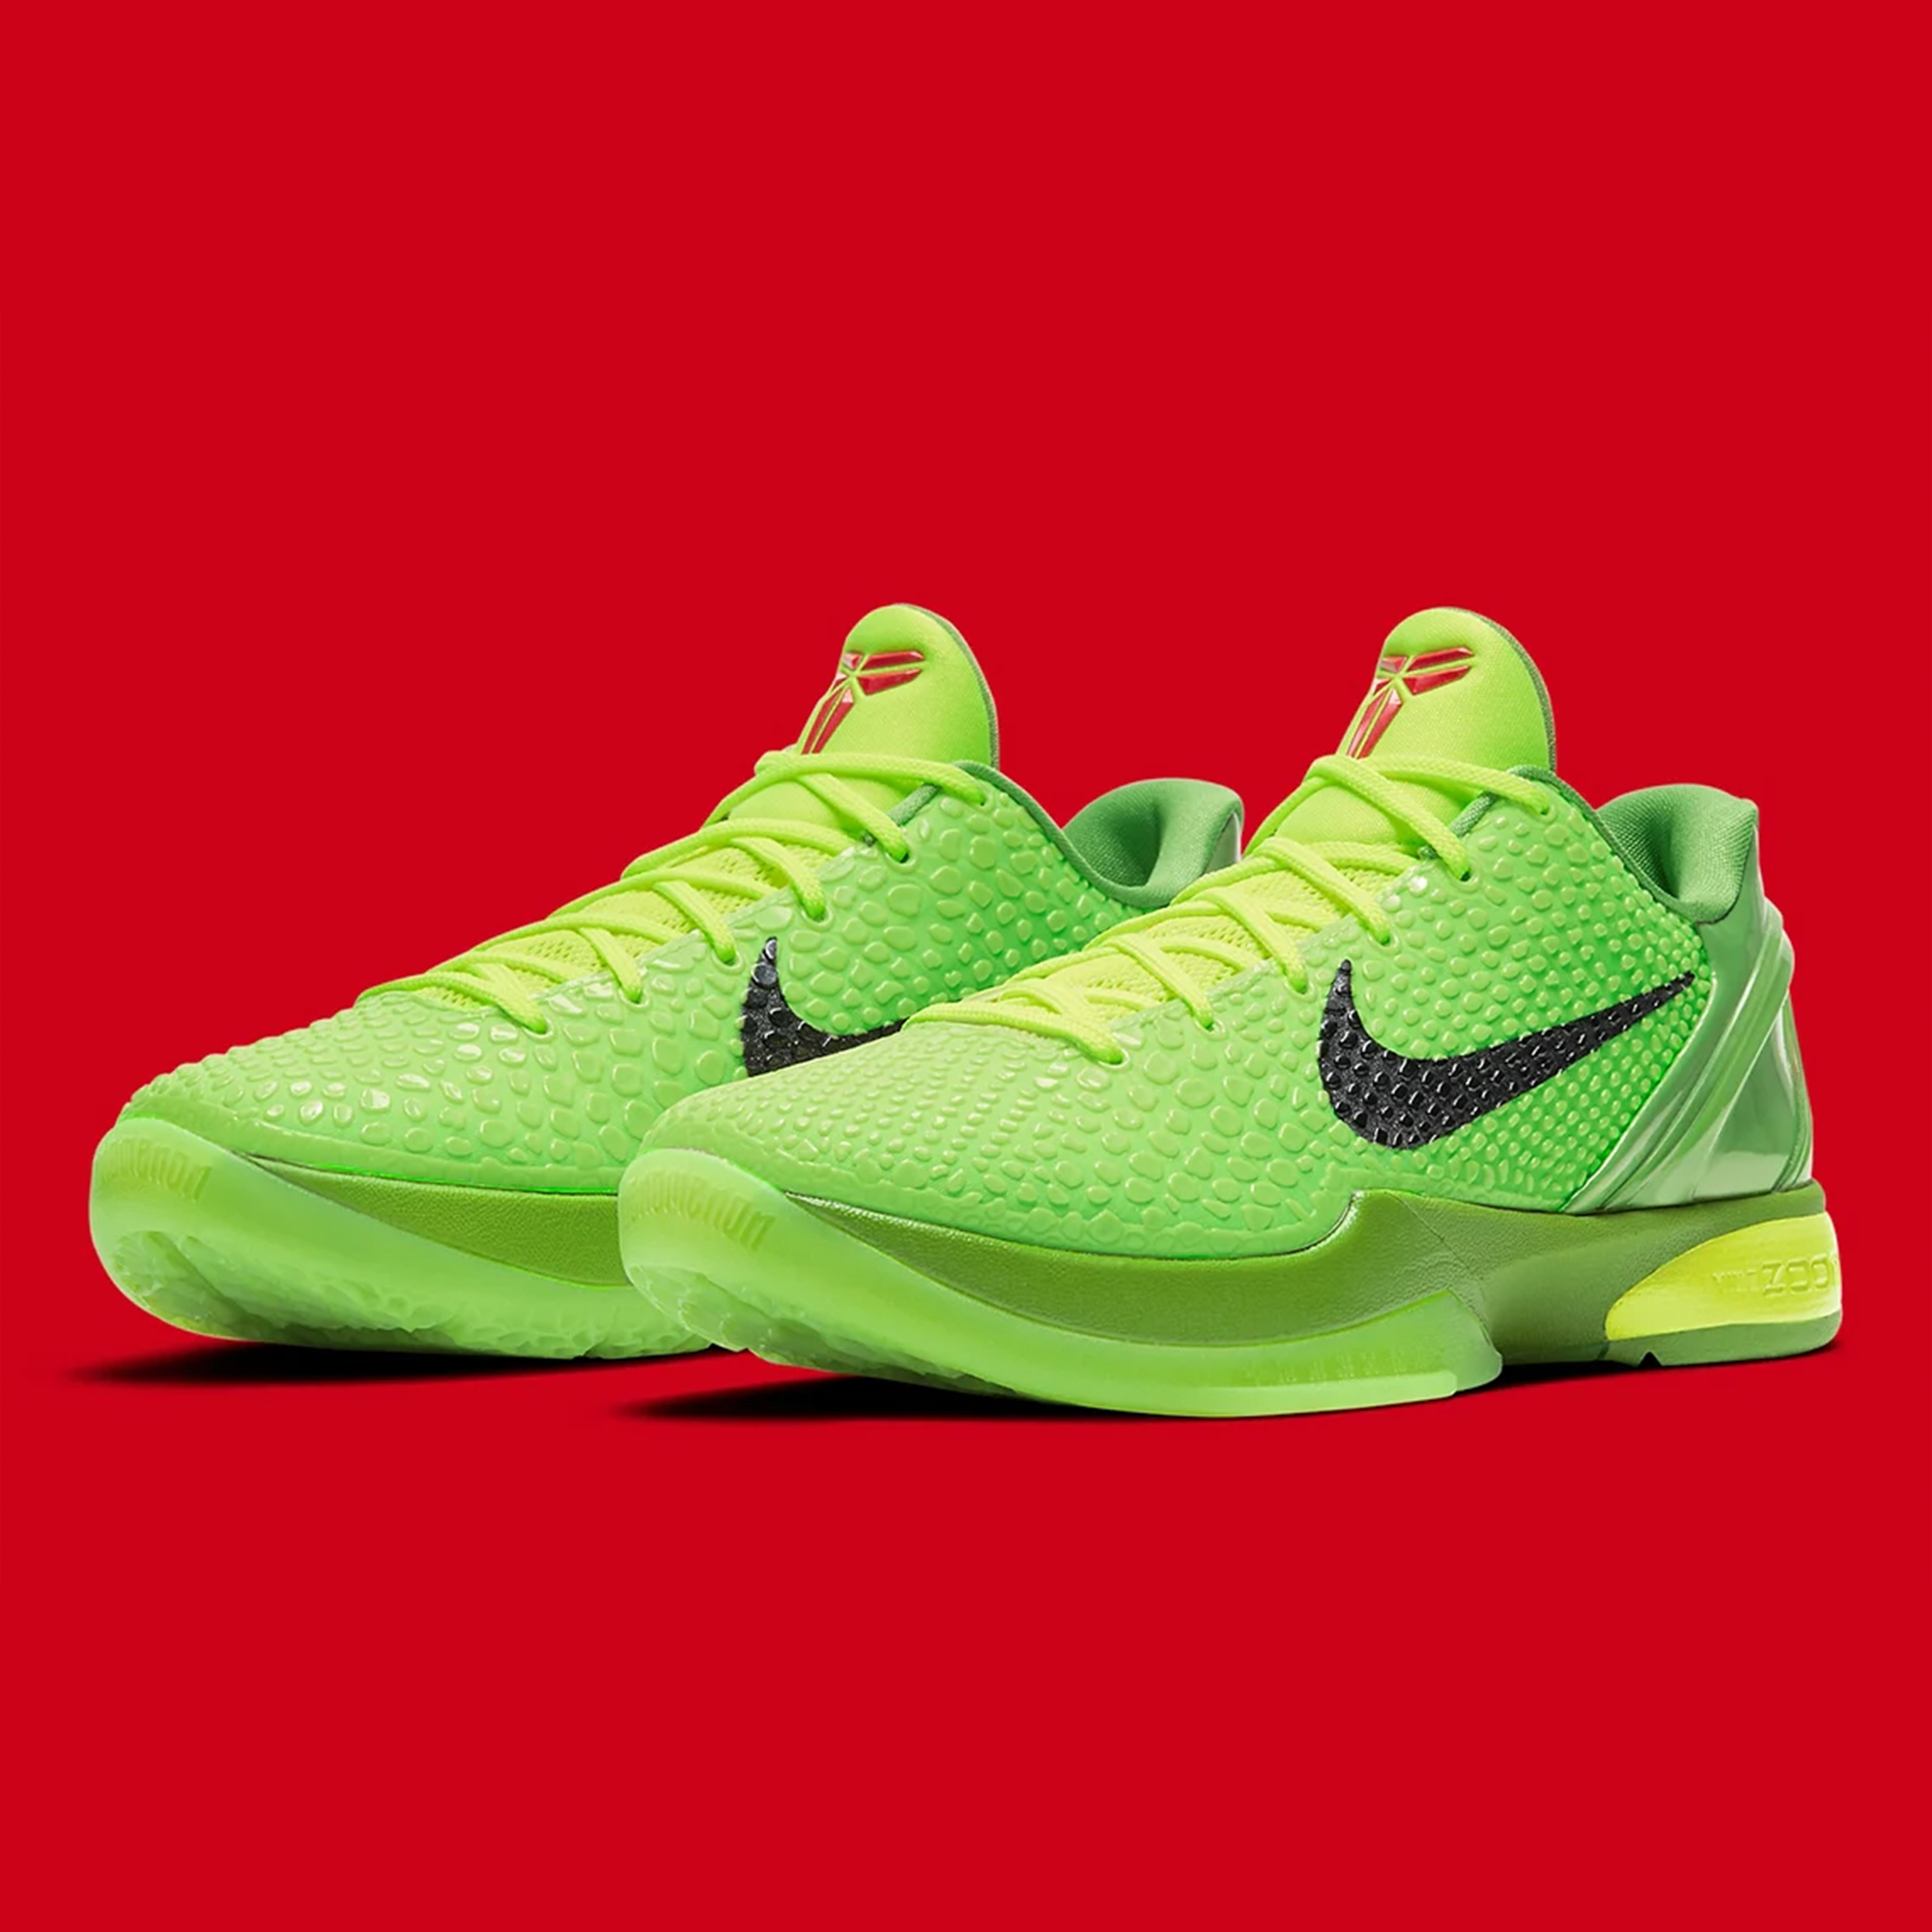 Kobe 6 Grinch – Jersey and Sneakers